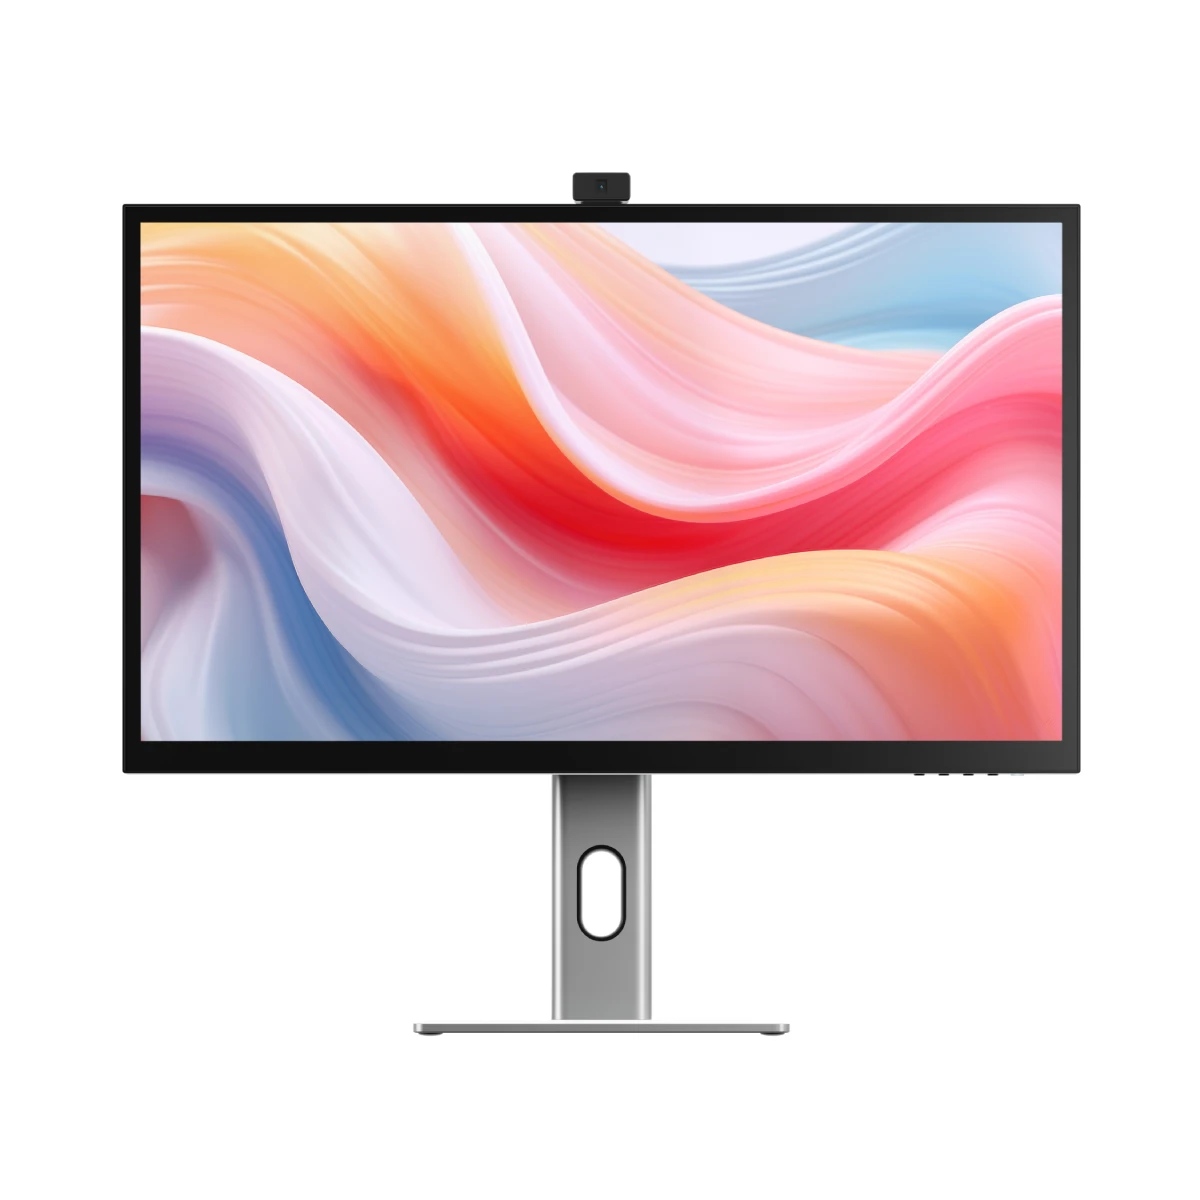 clarity-pro-27-uhd-4k-monitor-with-65w-pd-and-webcam-pack-of-2-dual-4k-universal-docking-station-displayport-edition_2